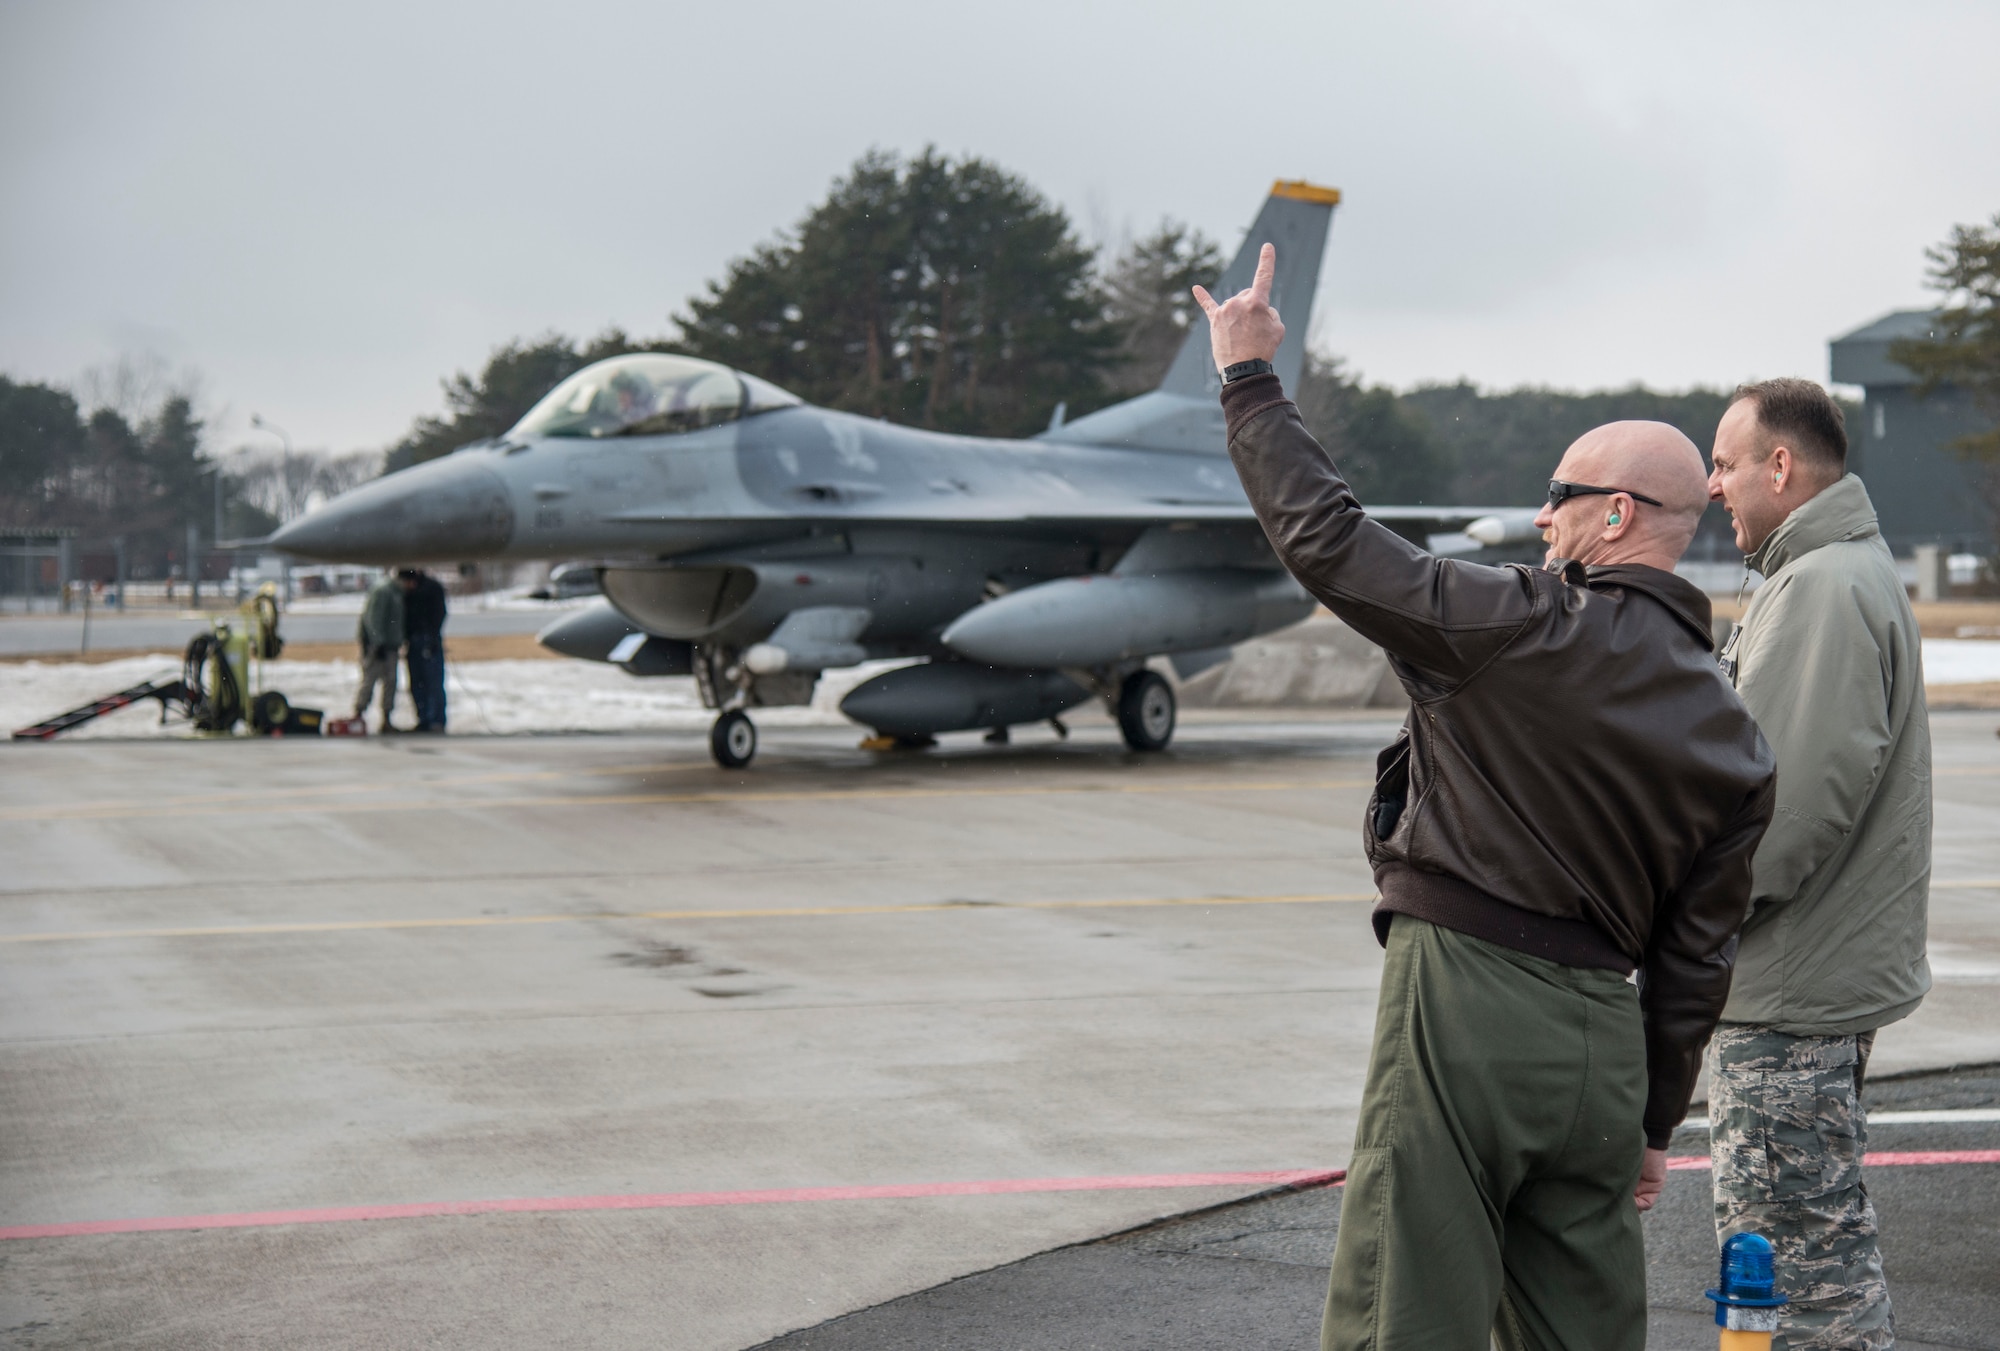 Col. R. Scott Jobe, 35th Fighter Wing commander, displays the 14th Fighter Squadrons cheer “wood” as a pilot taxis by at Misawa Air Base, Japan, March 4, 2017. The 14th FS recently returned from exercise COPE NORTH 17 at Anderson Air Force Base, Guam, it included 22 total flying units and more than 1,700 personnel from three countries. The purpose was to grow strong, interoperable relationships within the Indo-Asia-Pacific region through integration of airborne and land-based command and control assets. (U.S. Air Force photo by Senior Airman Brittany A. Chase)